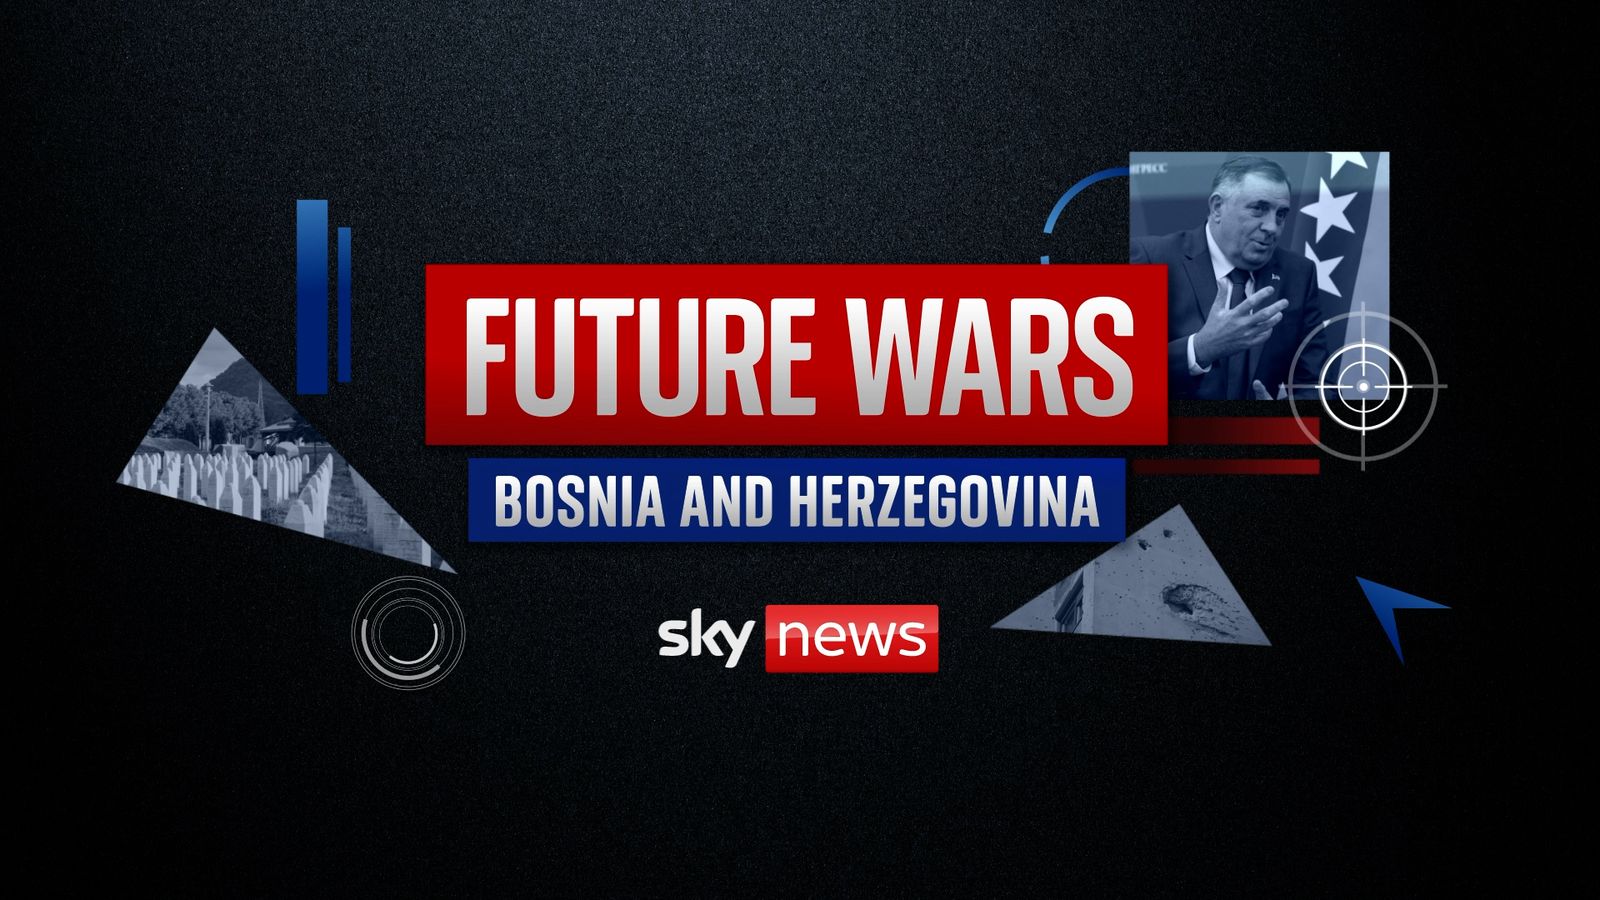 Could history repeat itself? Conflict threatens to return to Bosnia and Herzegovina